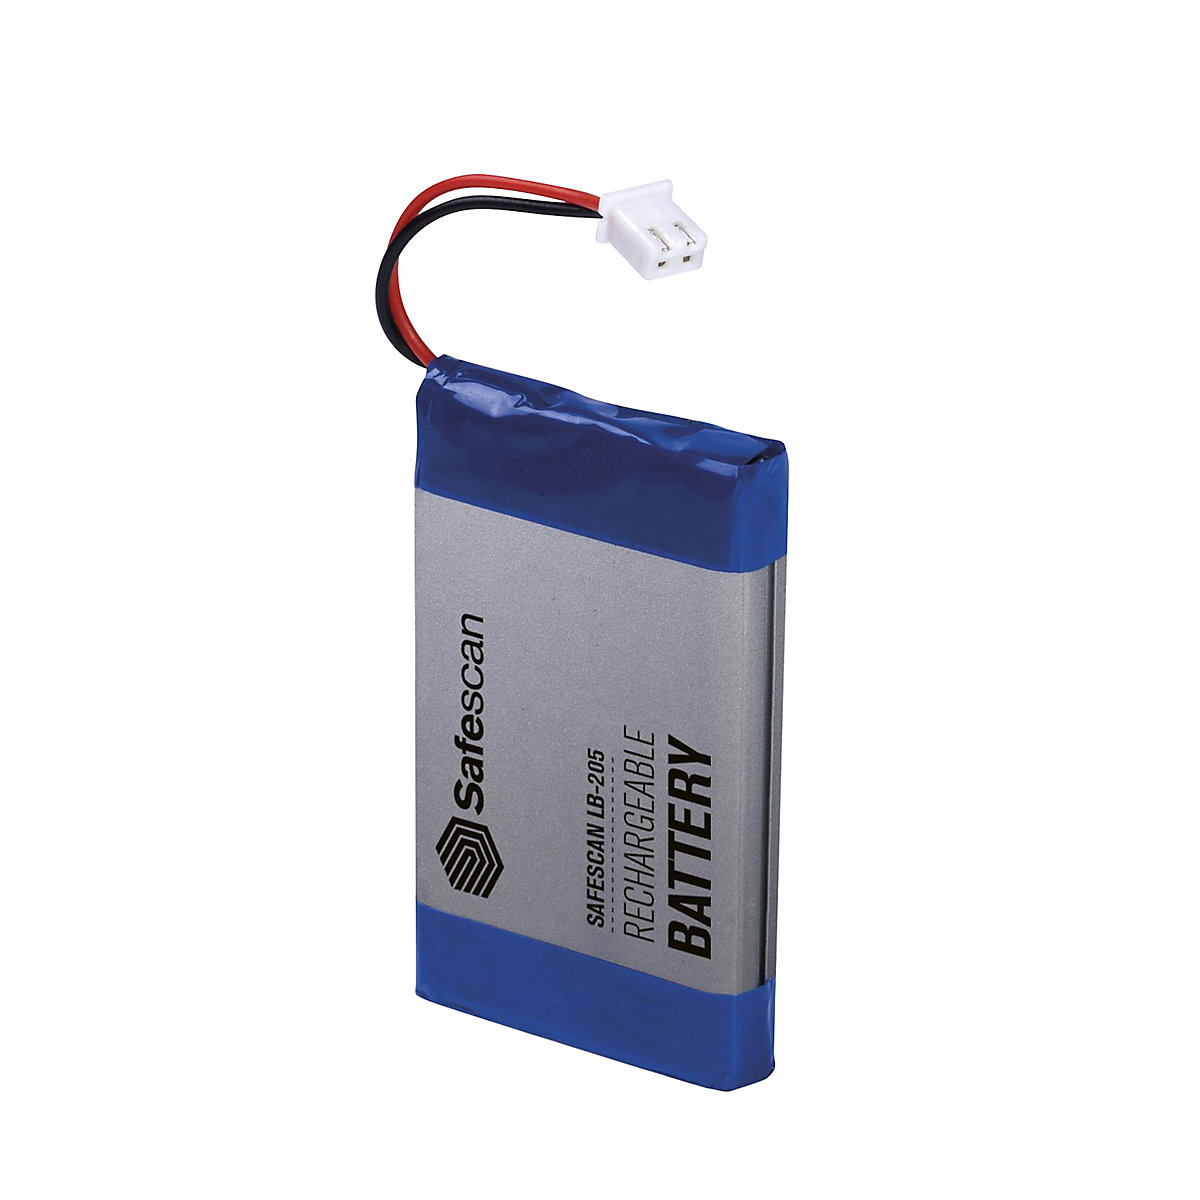 Rechargeable battery - Safescan